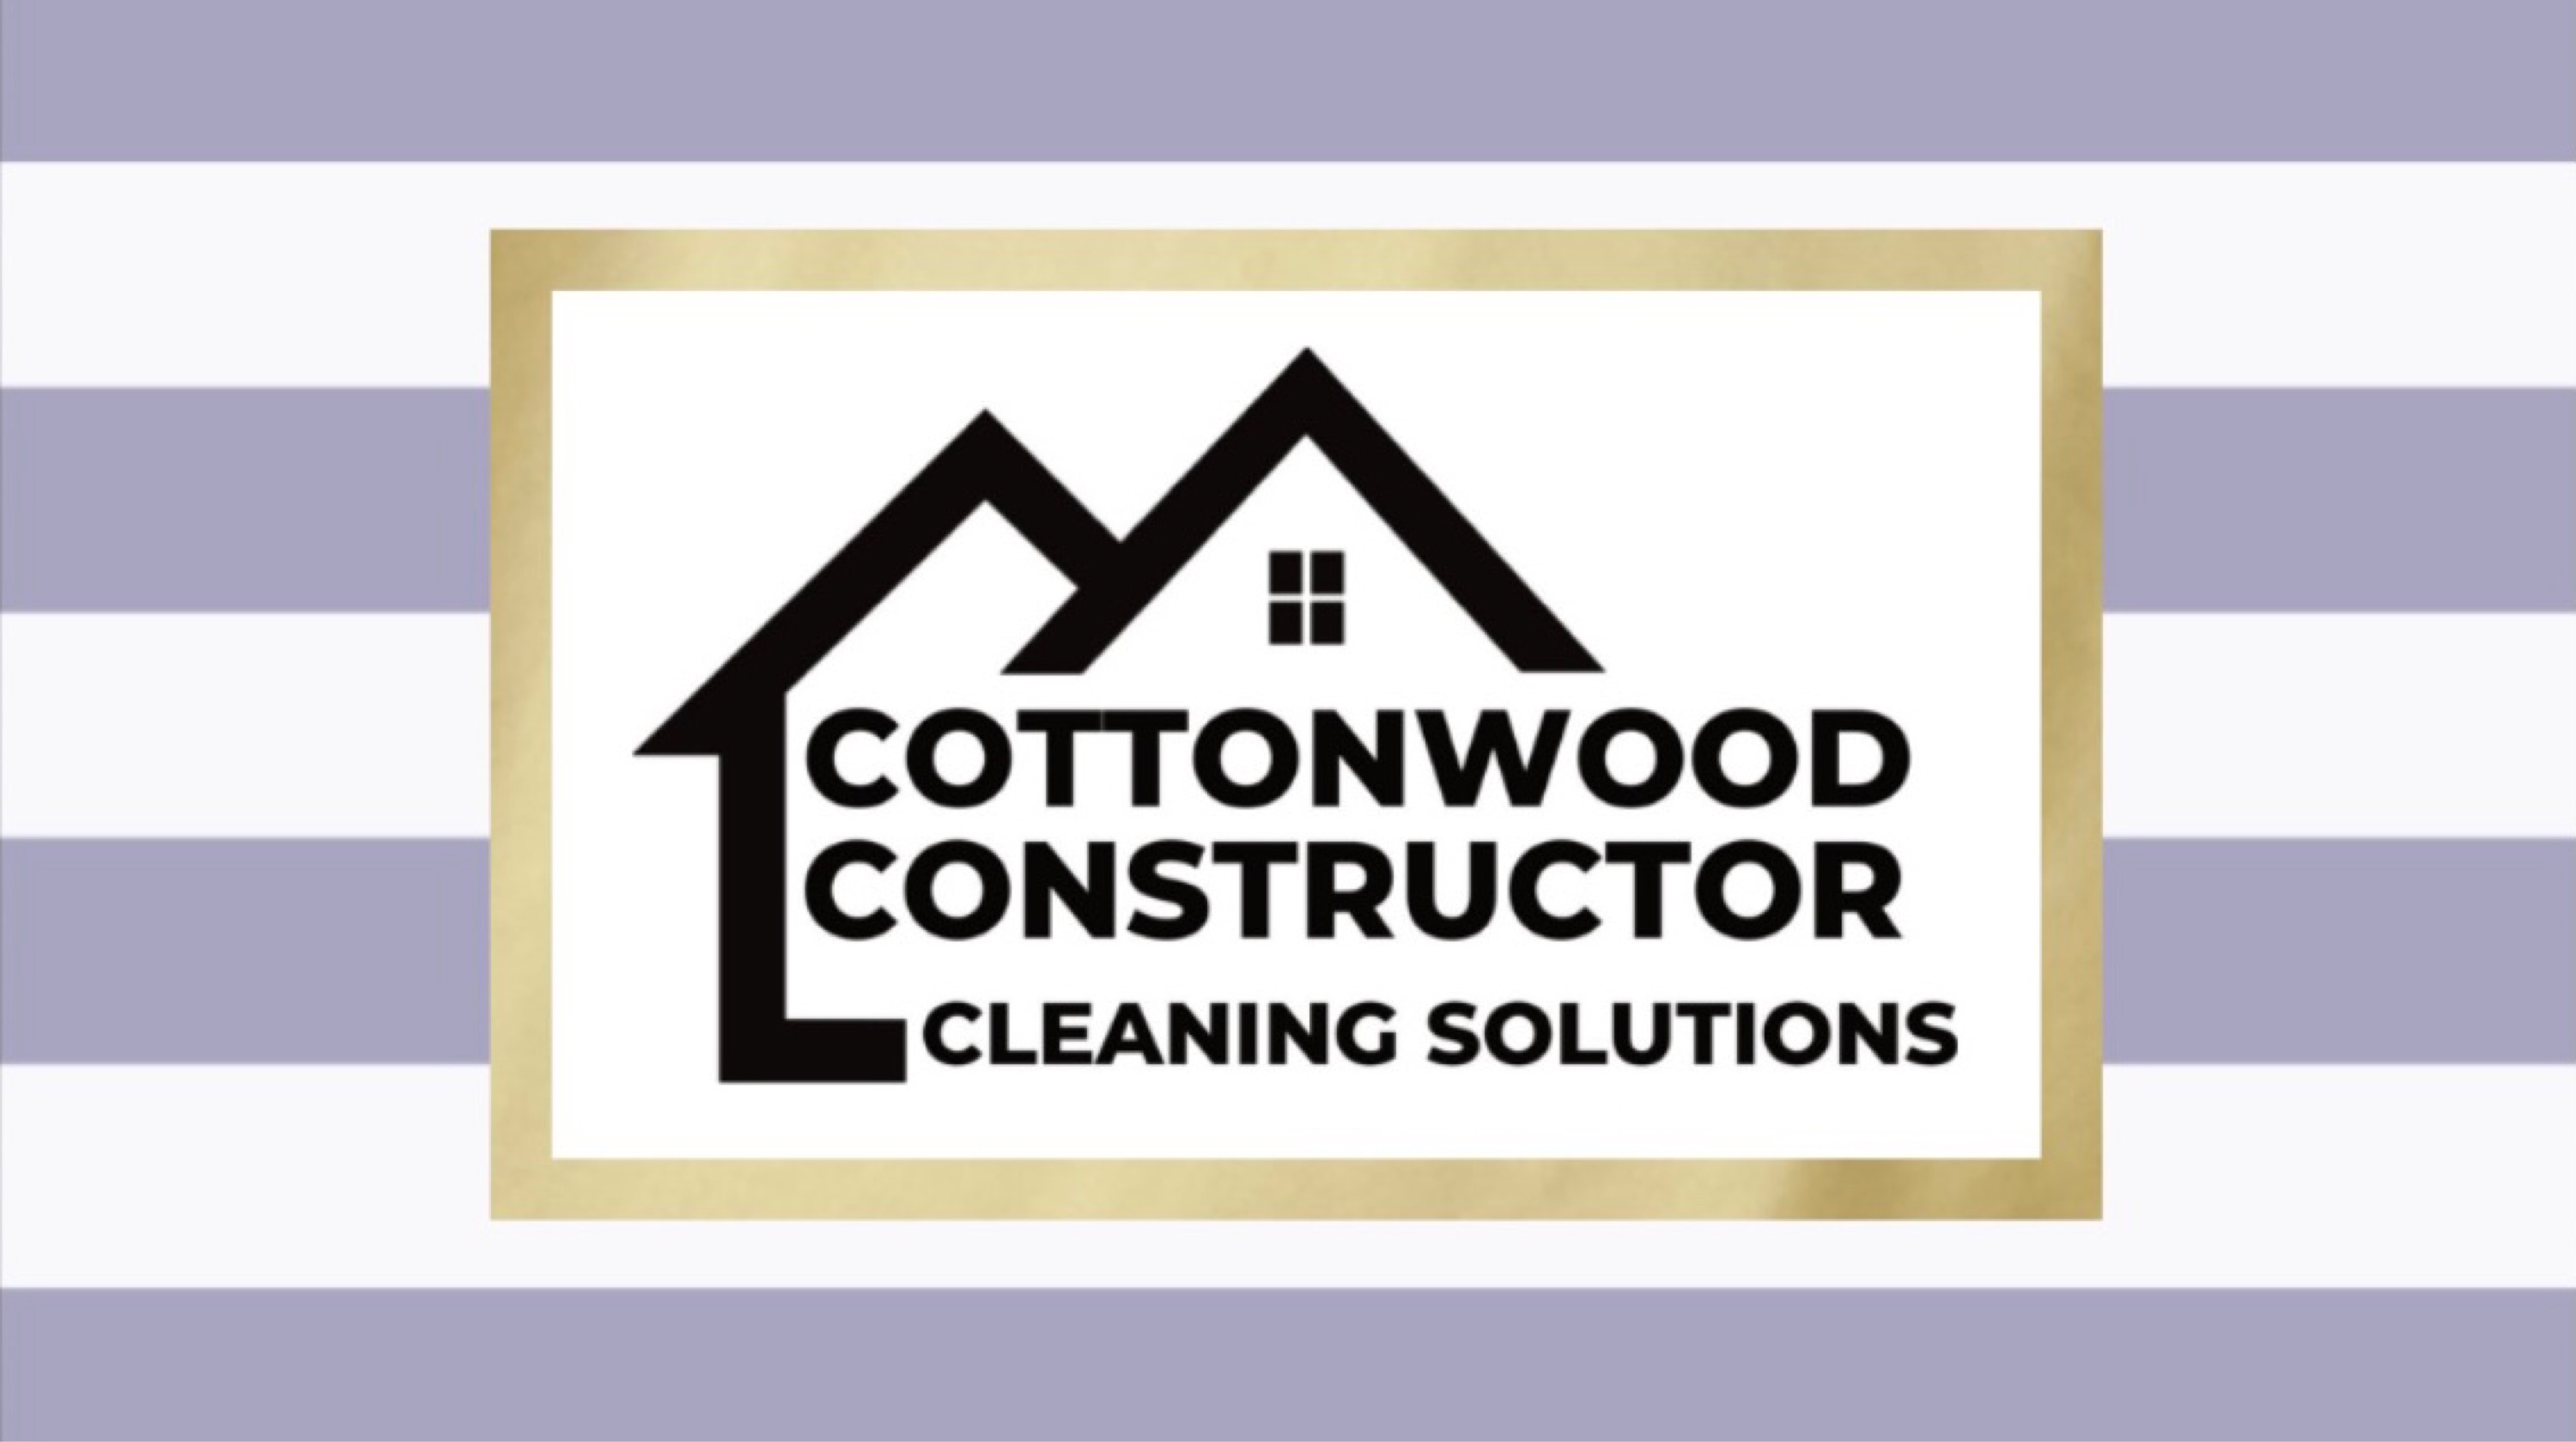 Cottonwood Constructor Cleaning Solutions - Cleaning service - 12 photos  Facebook Logo